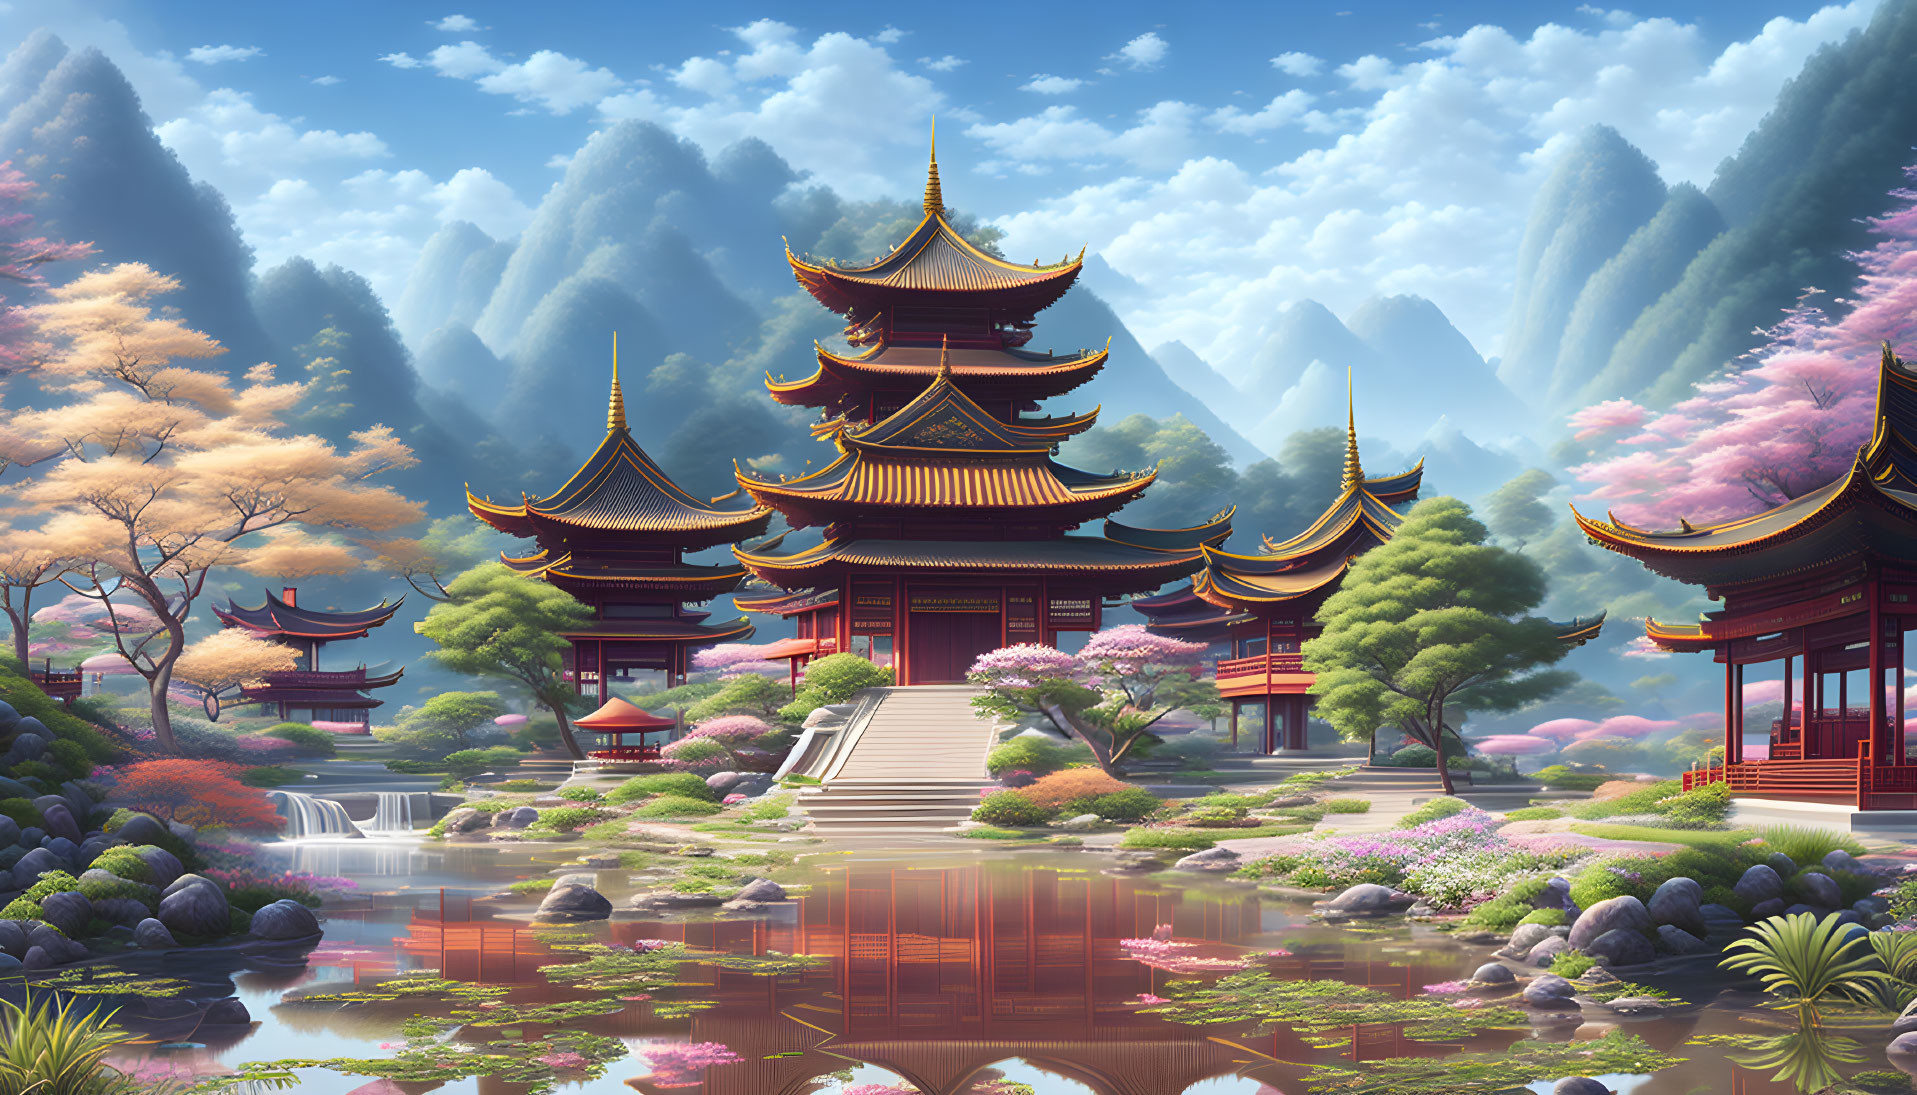 Traditional pagodas, cherry blossoms, river, and misty mountains in serene landscape